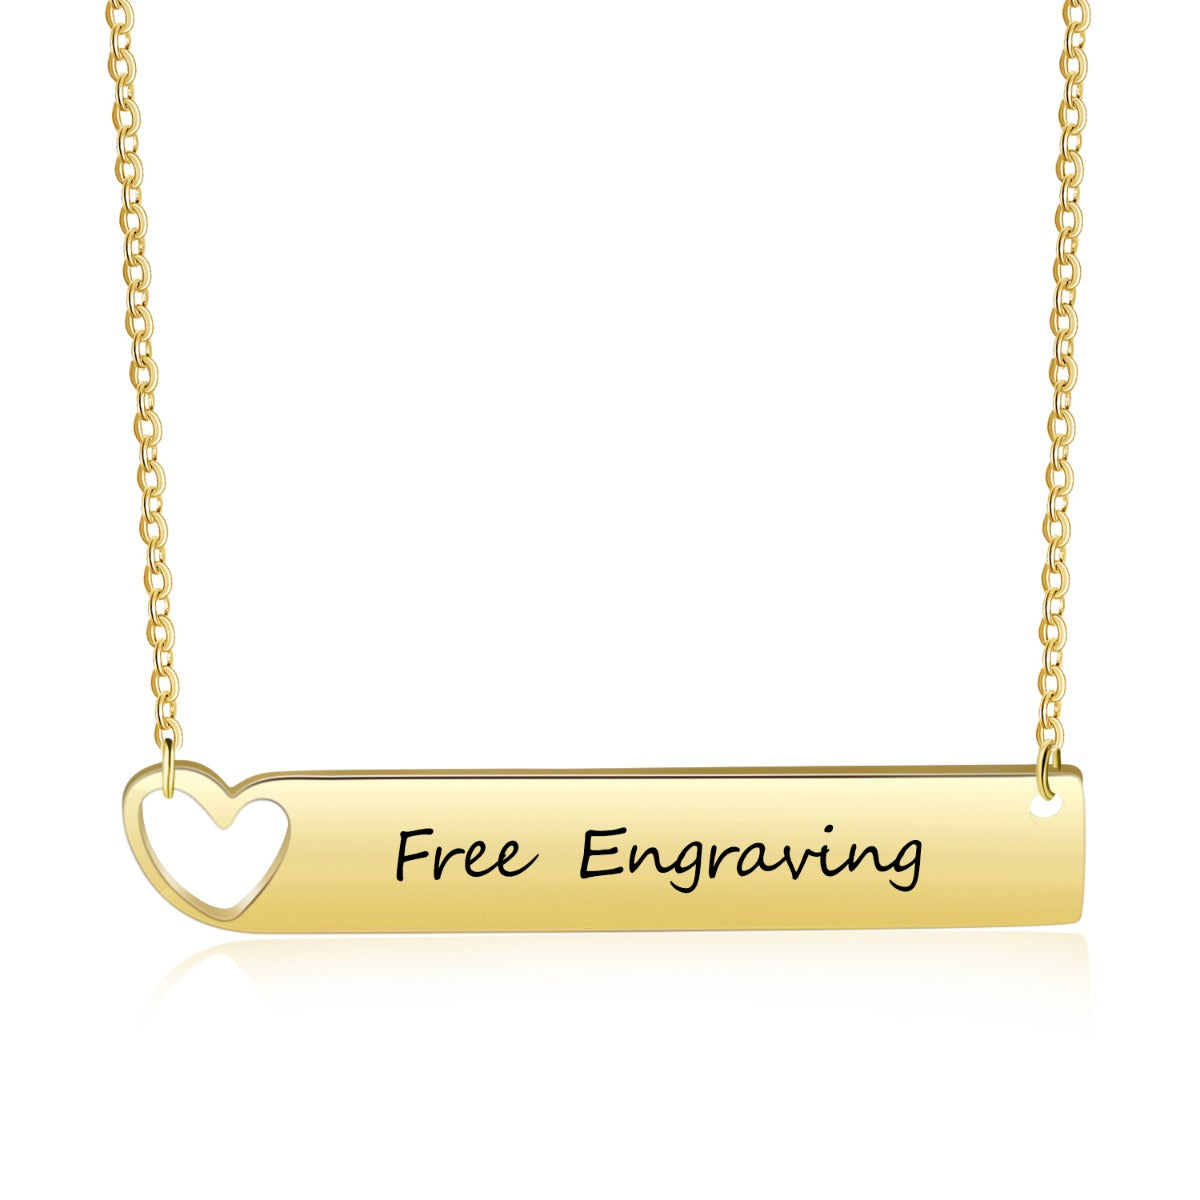 ThinkEngraved engraved necklace 14k Gold Over Surgical Steel Personalized Engraved Bar Name Necklace - Heart Cut Out